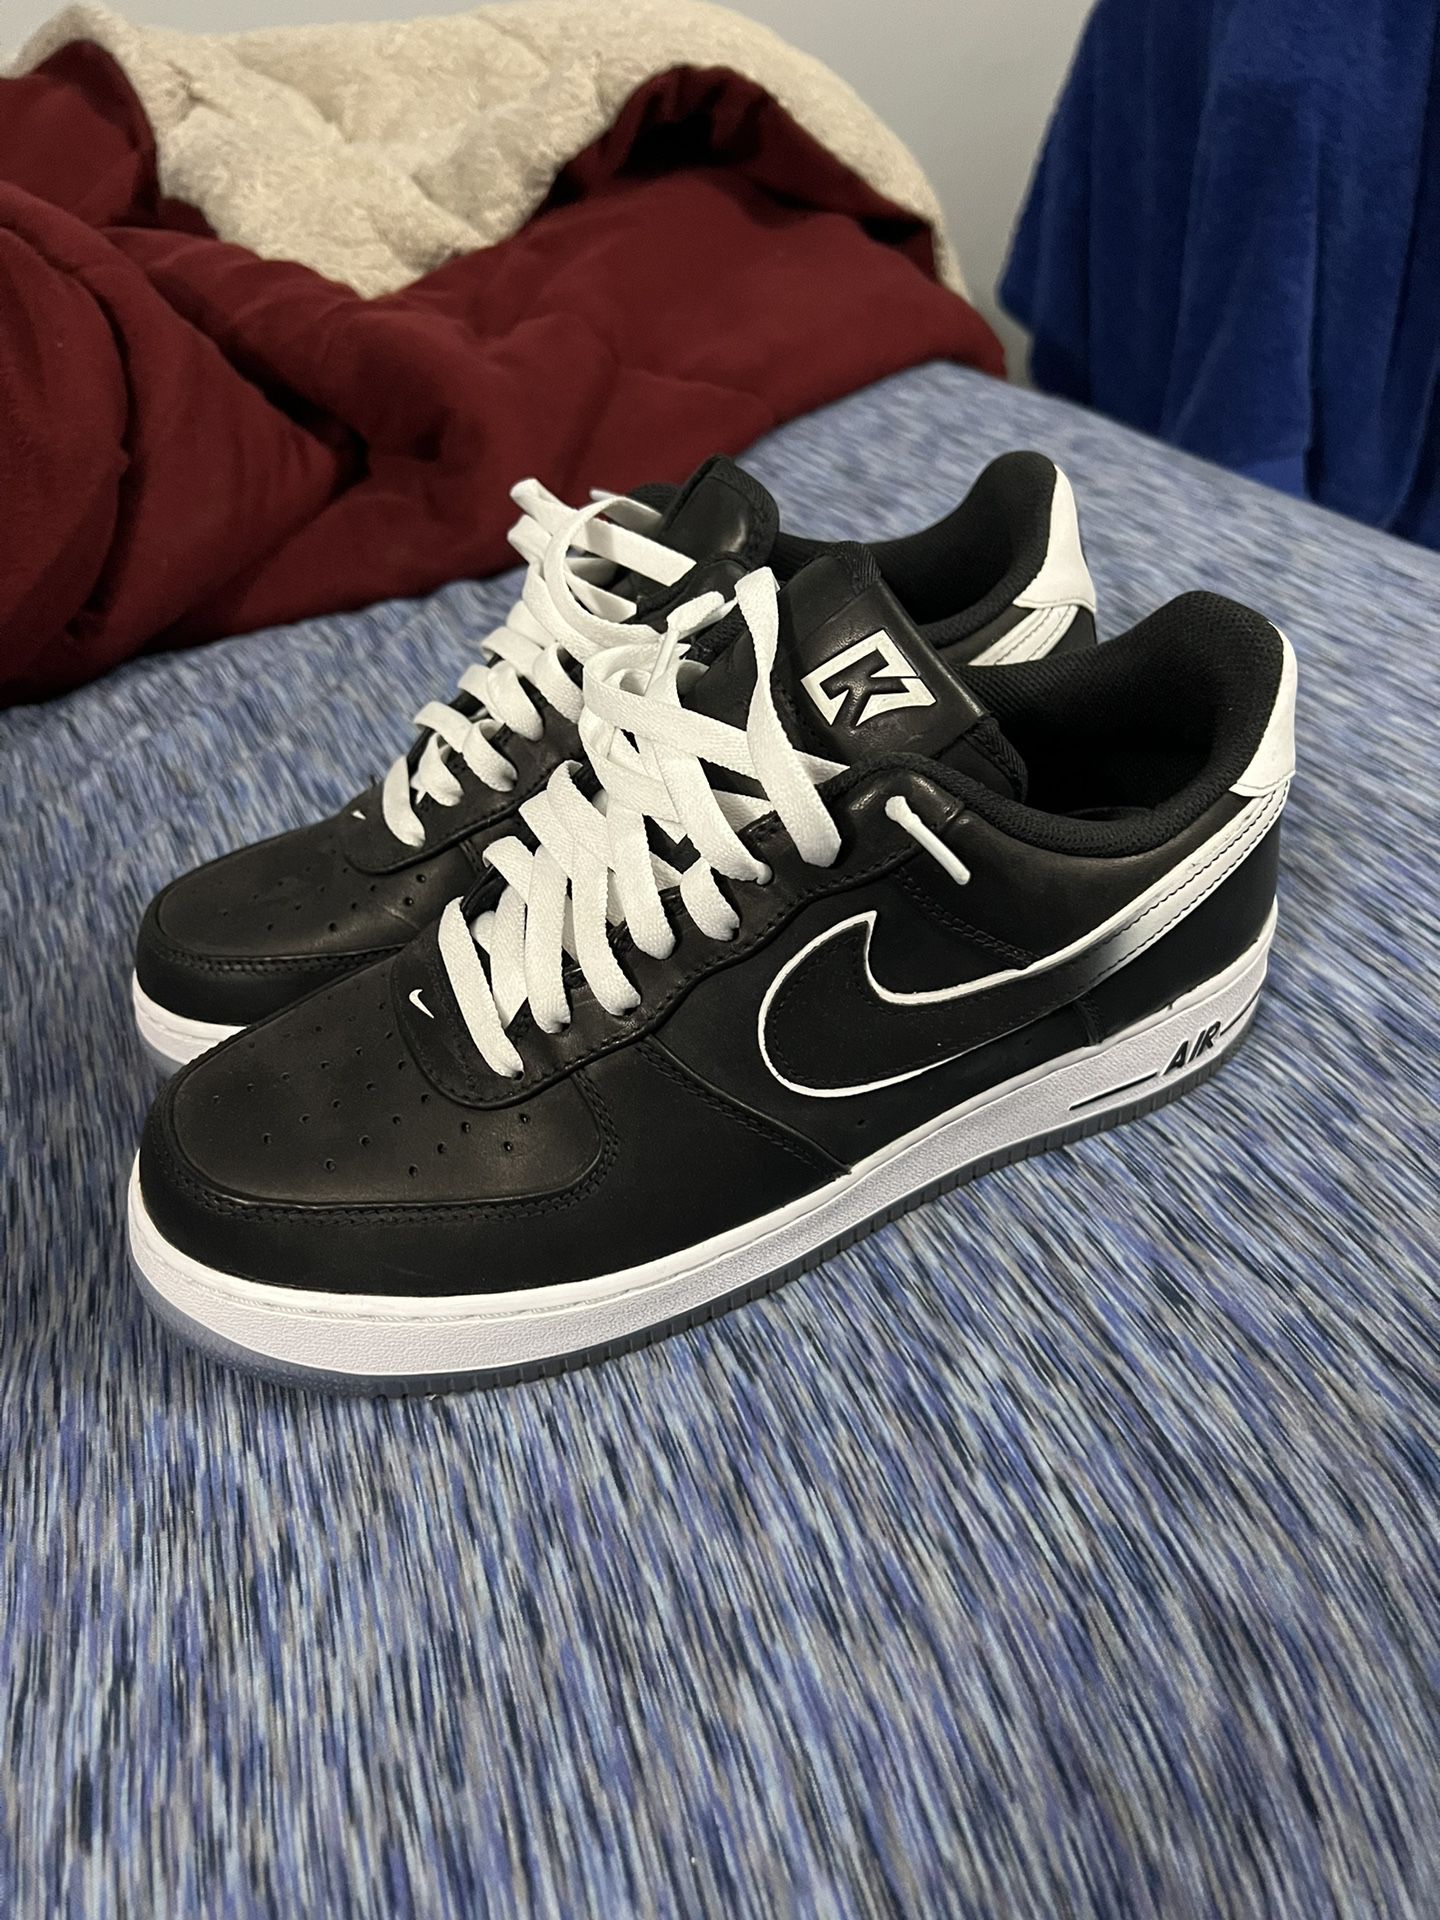 Romanschrijver Politieagent tank Colin Kaepernick x Air Force 1 Low '07 for Sale in Aurora, IL - OfferUp